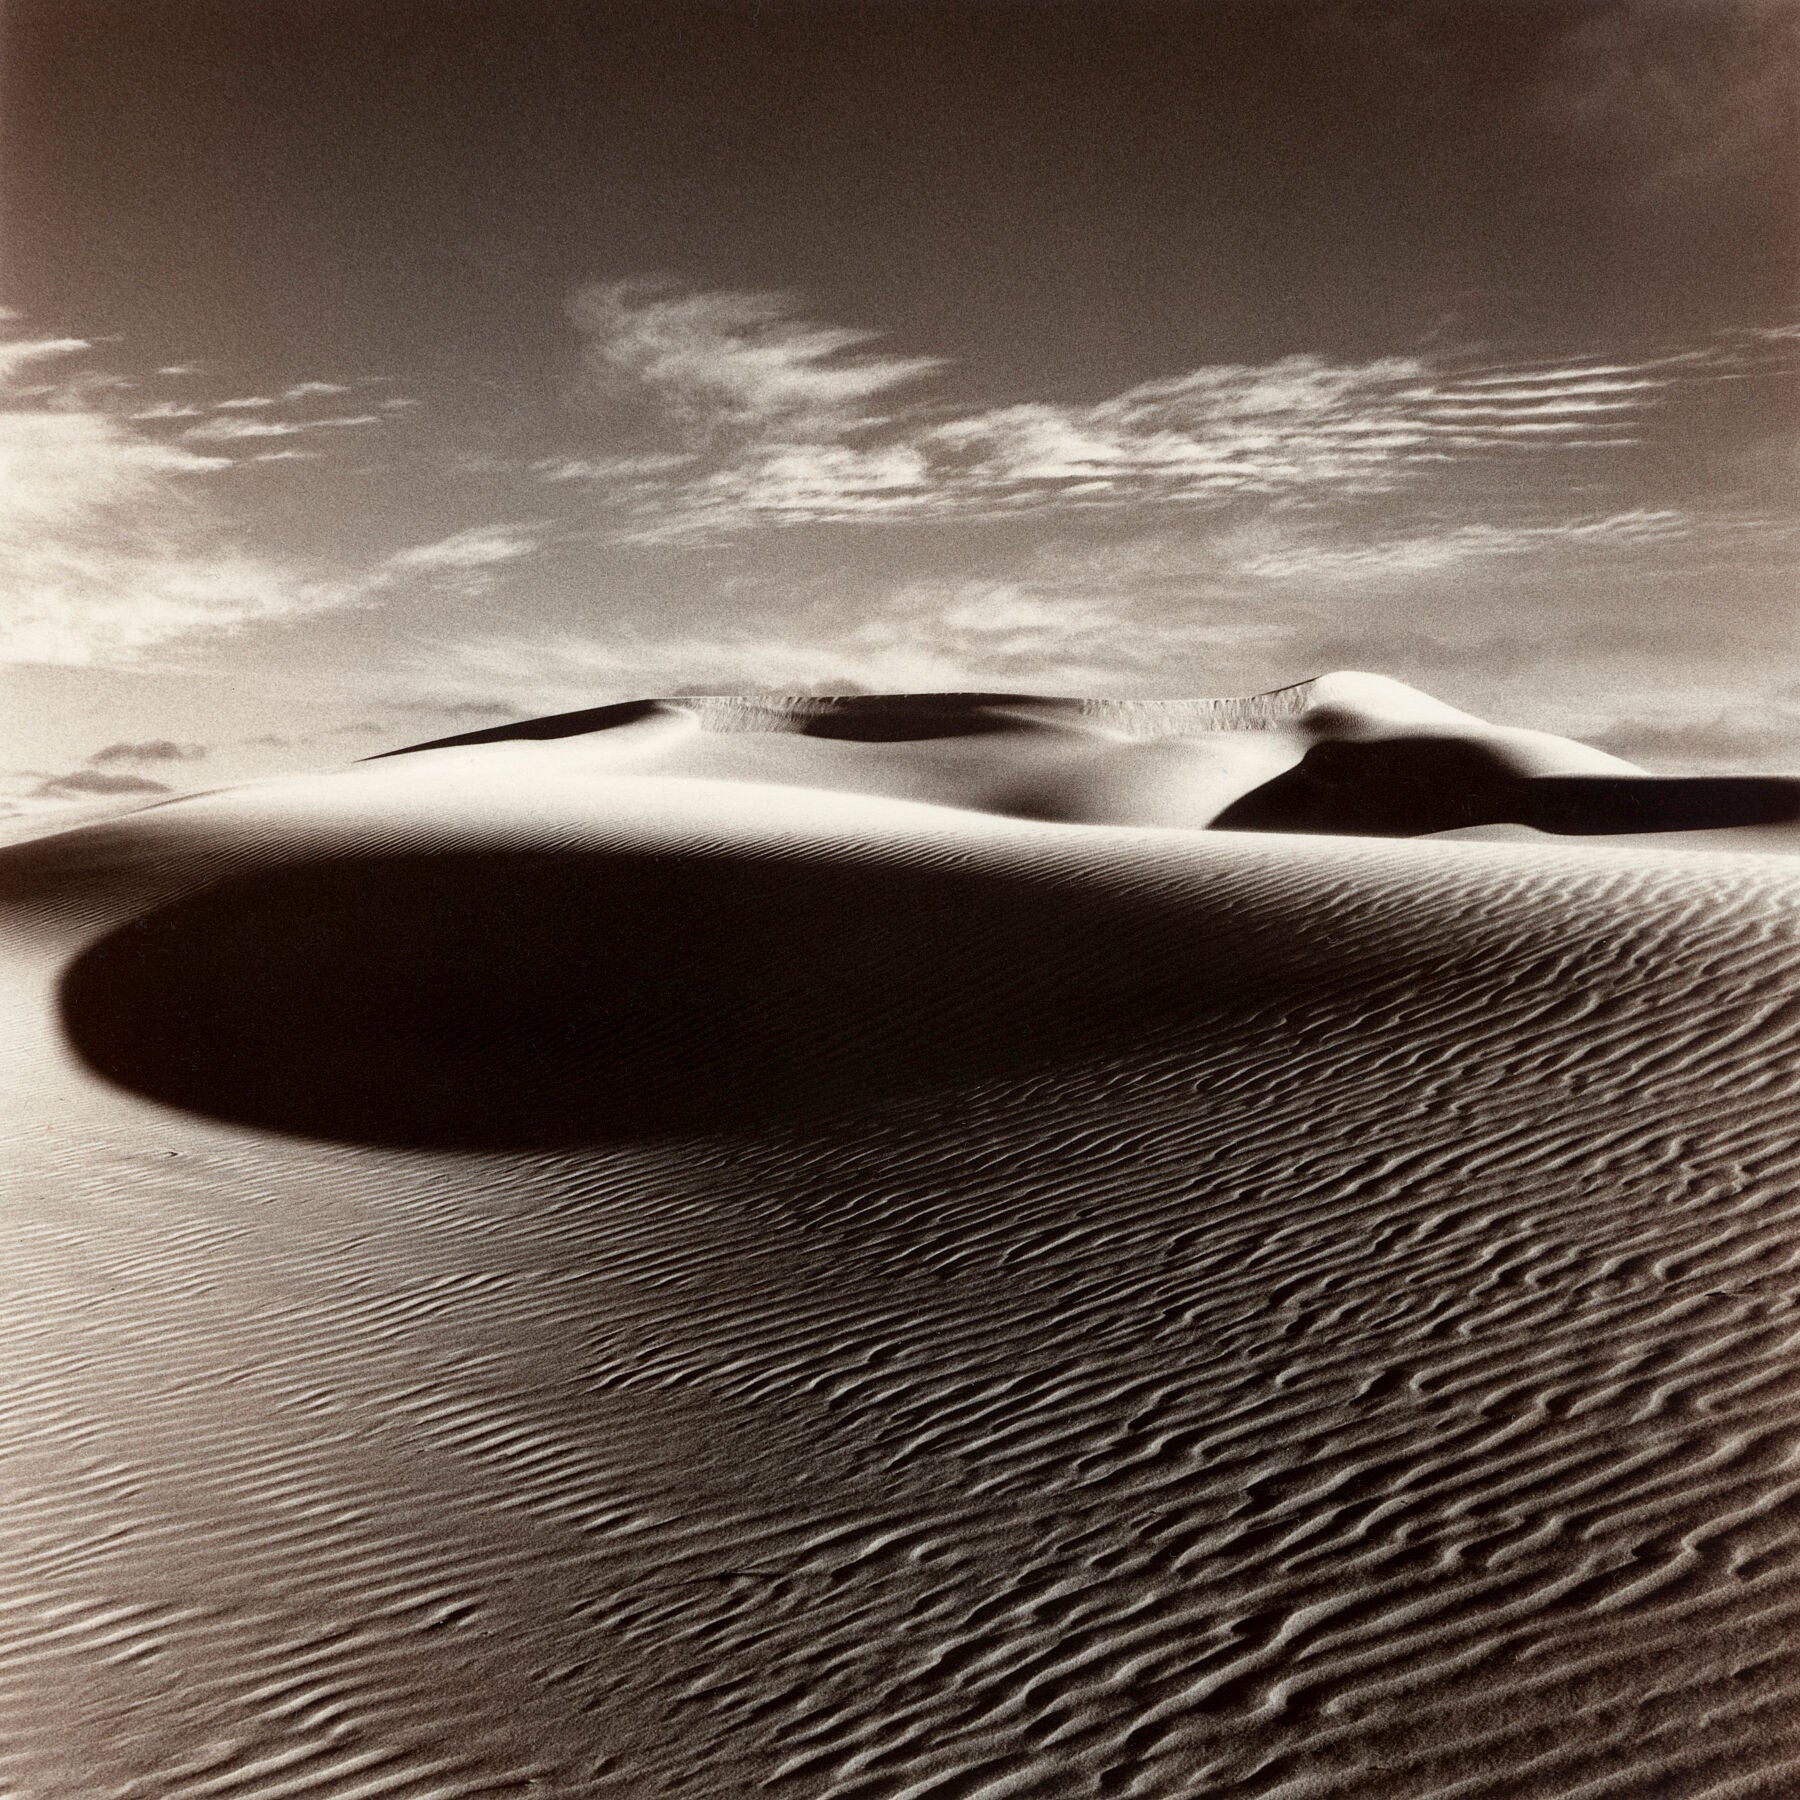 Limited edition black and white landscape photography prints by Paul O'Connor - Sand Dunes 3, Eucla, the easternmost locality in Western Australia